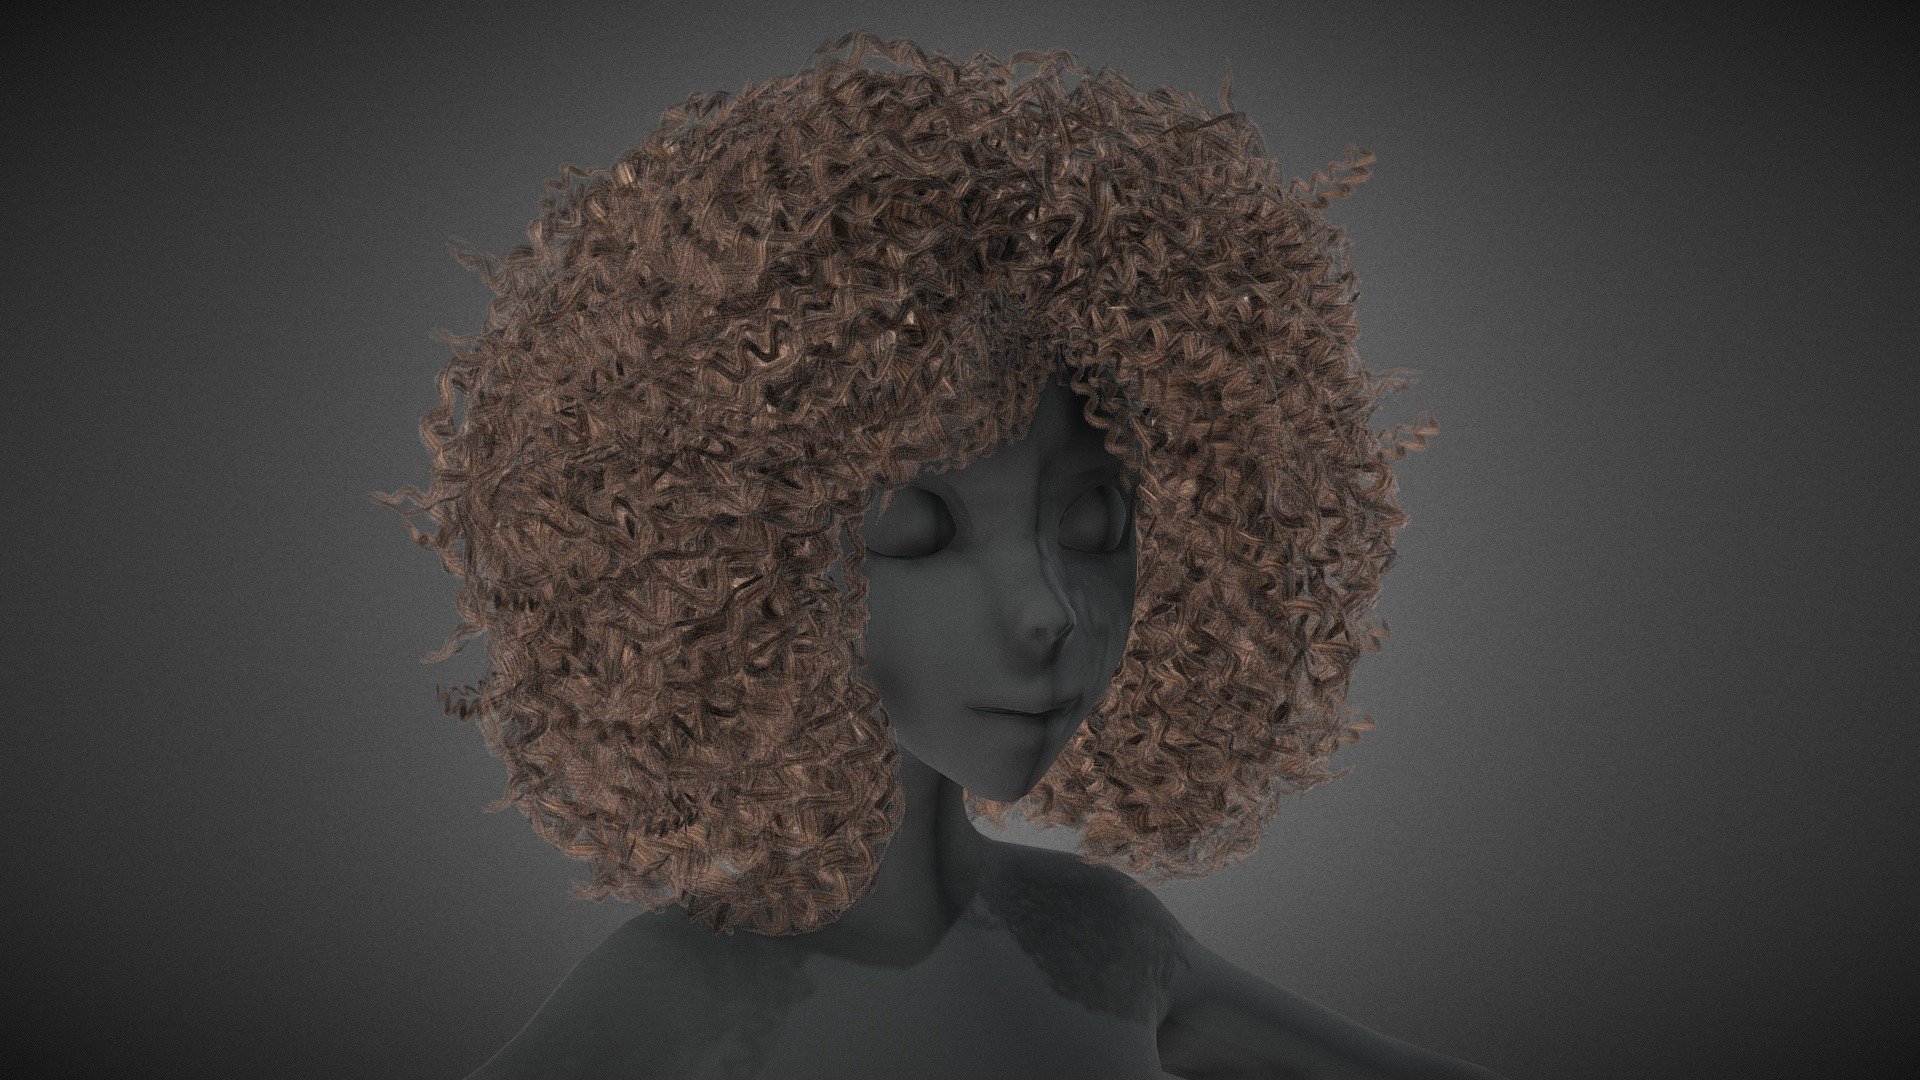 CG StudioX Present :
Female Hair Cards Style 9 - Wild Loose lowpoly/PBR




The photo been rendered using Marmoset Toolbag 4 (real time game engine )

The head model is decimated to show how the hair looks on the head.


Features :



Comes with Specular and Metalness PBR 4K texture .

Good topology.

Low polygon geometry.

The Model is prefect for game for both Specular workflow as in Unity and Metalness as in Unreal engine .

The model also rendered using Marmoset Toolbag 4 with both Specular and Metalness PBR and also included in the product with the full texture.

The texture can be easily adjustable .


Texture :



One set of UV for the Hair [Albedo -Normal-Metalness -Roughness-Gloss-Specular-Ao-Alpha-Depth-Direction-ID-Root] (4096*4096).

One set of UV for the Cap [Albedo -Normal-Metalness -Roughness-Gloss-Specular-Alpha] (4096*4096).


Files :
Marmoset Toolbag 4 ,Maya,,FBX,glTF,Blender,OBj with all the textures.




Contact me for if you have any questions.
 - Female Hair Cards Style 9 - Wild Loose - Buy Royalty Free 3D model by CG StudioX (@CG_StudioX) 3d model